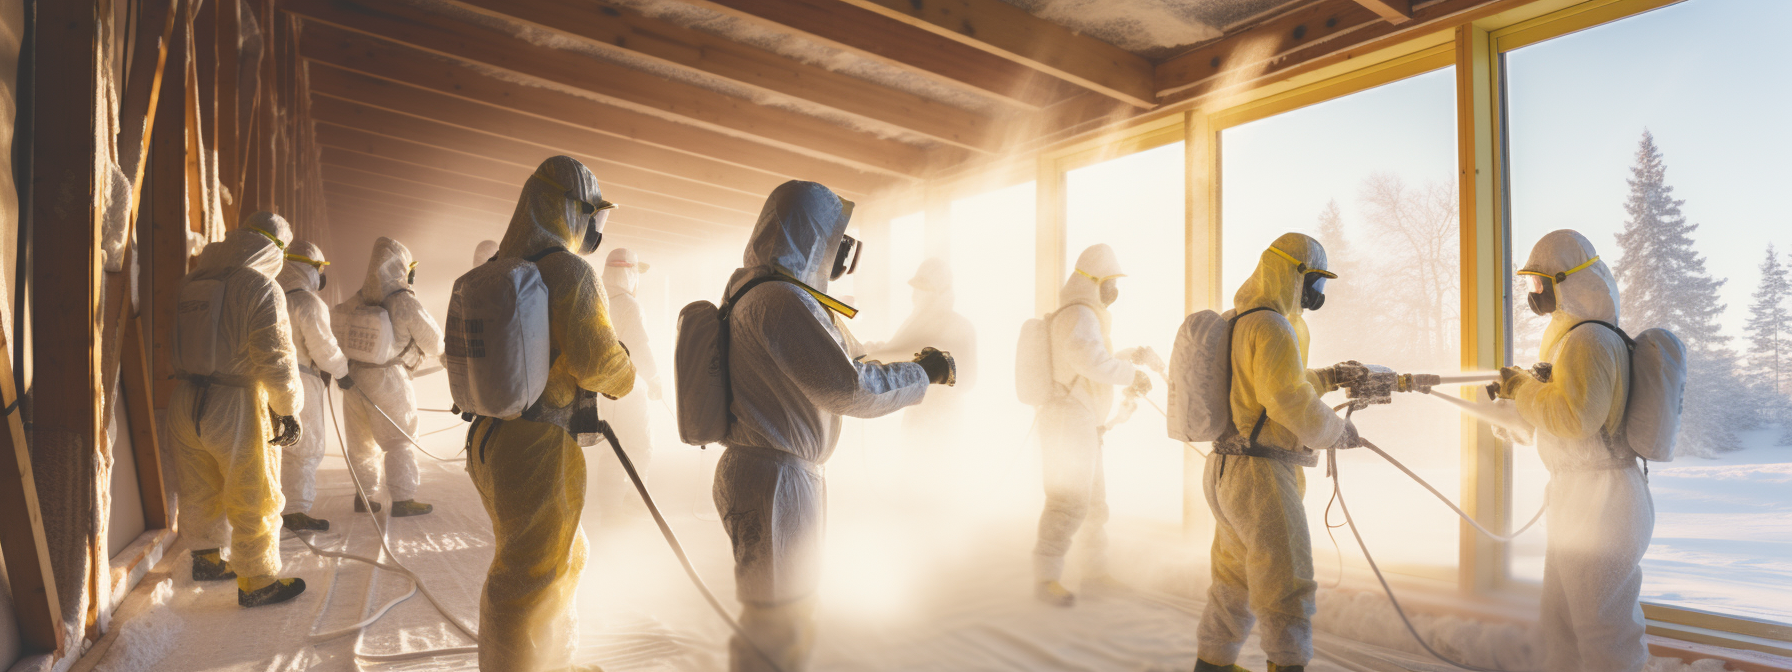 a group of construction workers in vancouver use spray foam insulation to insulate a building.